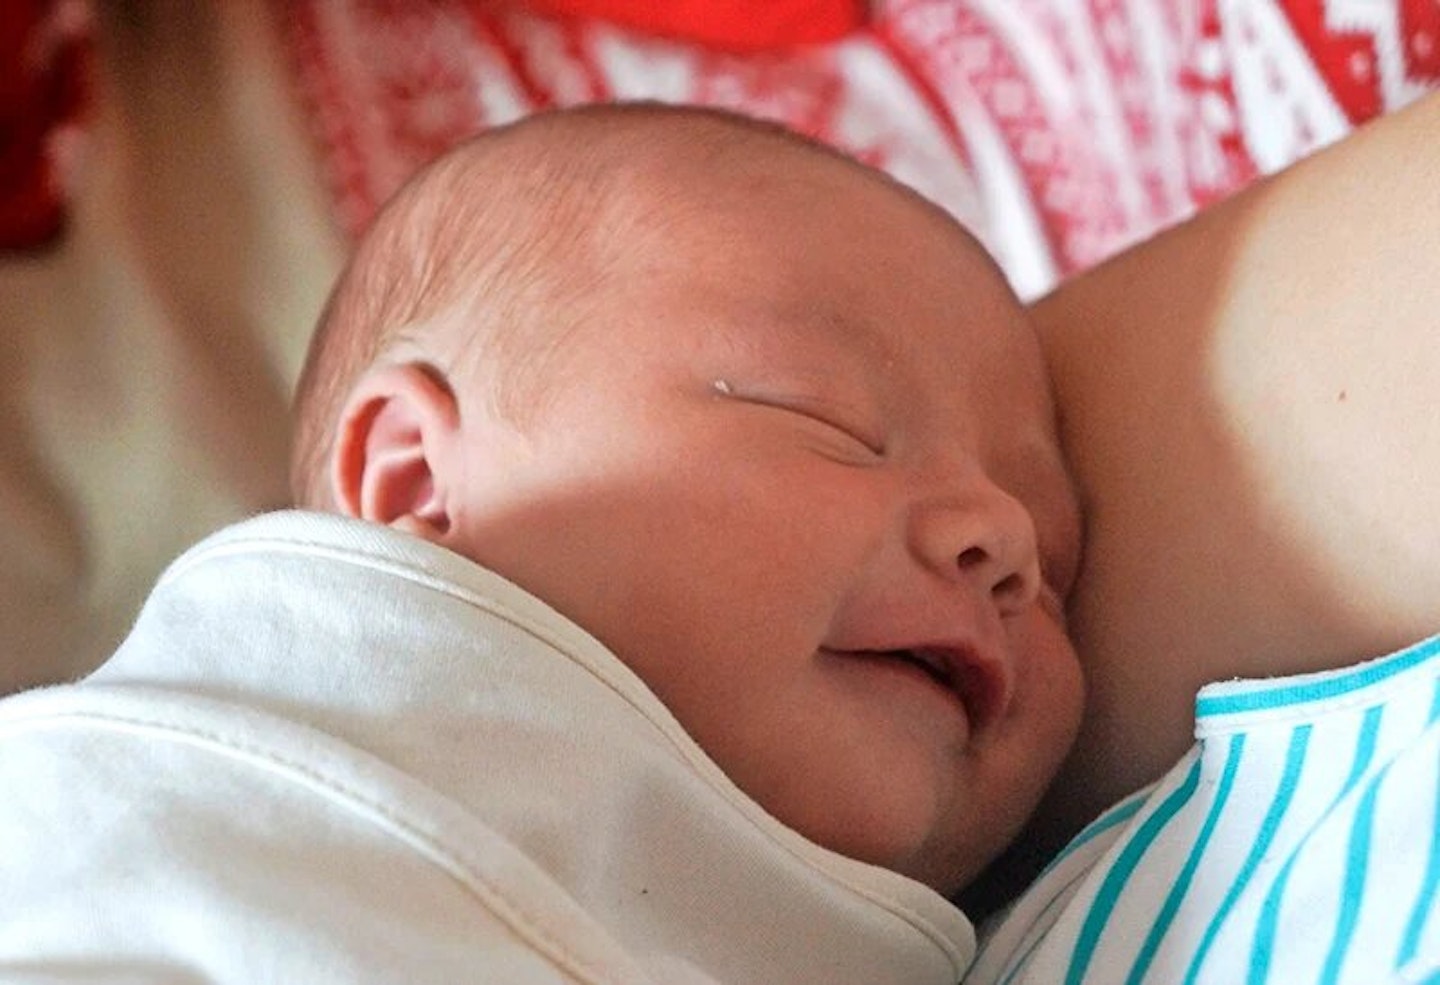 “I had my 11-pound baby in a home birth”